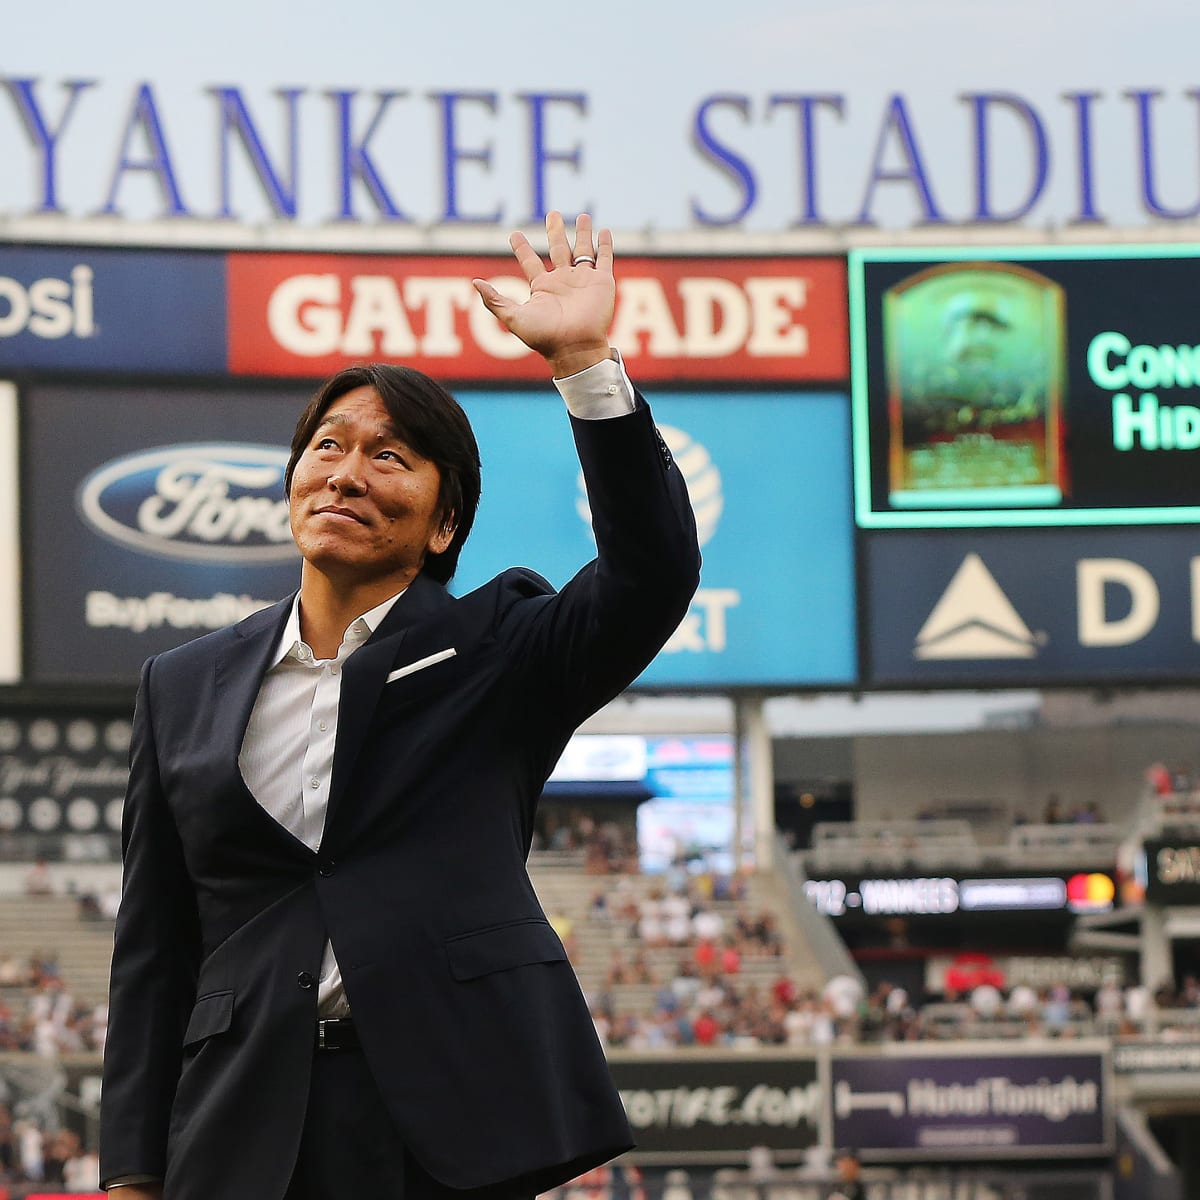 Source: Hideki Matsui agrees to deal with Oakland Athletics – The